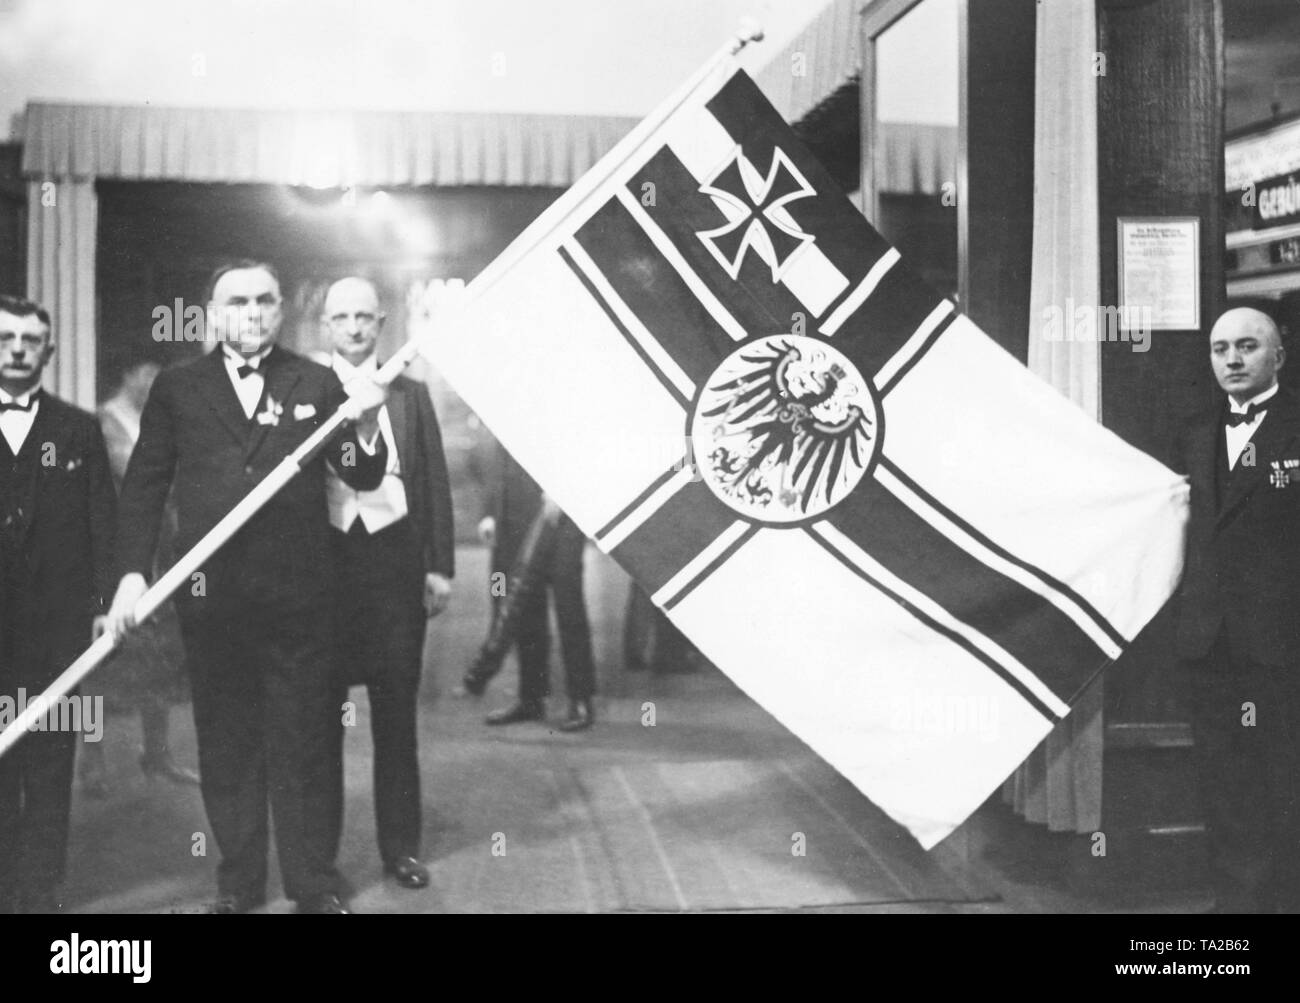 The former captain of the SMS Braunschweig hands over the maritime flag of his ship to members of the DNVP (German National People's Party) at the founding ceremony of the party at Goerlitzer Bahnhof, Berlin. Stock Photo